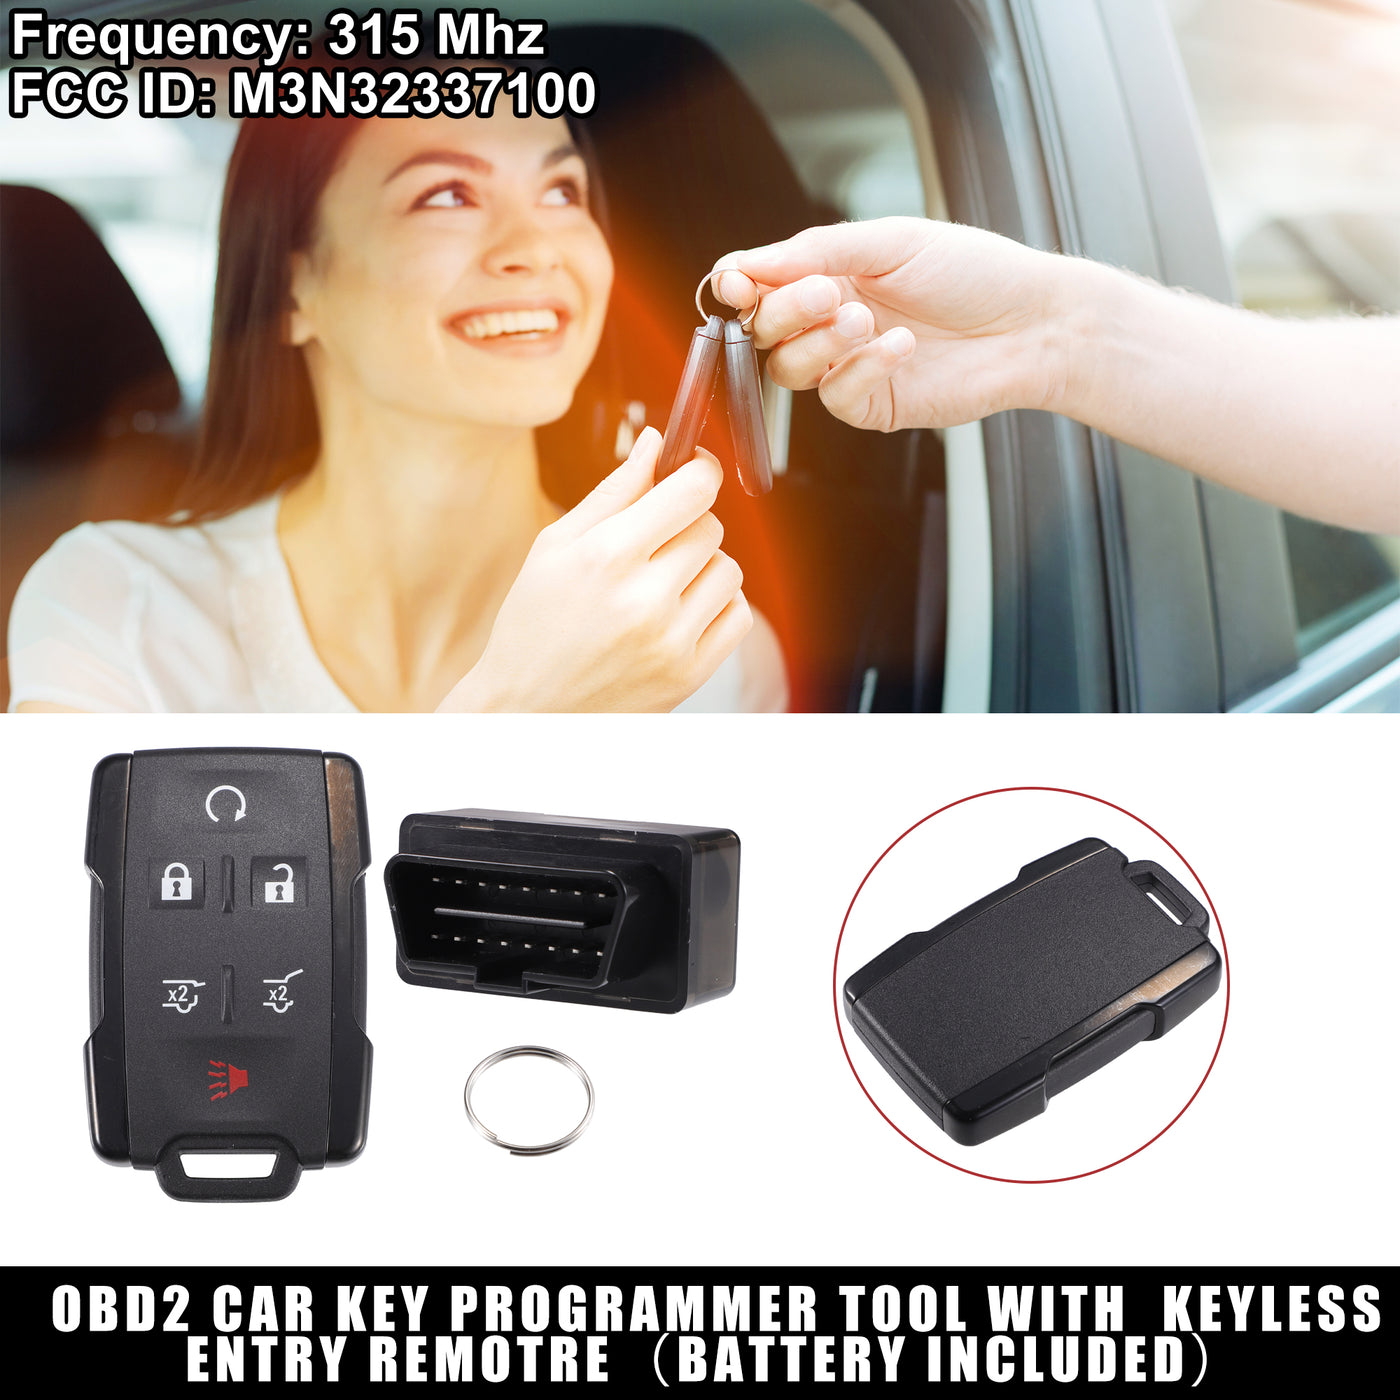 X AUTOHAUX Key Programmer with Keyless Entry Remote Key Fob Replacement for Chevrolet Tahoe Suburban for GMC Yukon 2015-2020 M3N32337100 315Mhz with Chip 6 Button OBD2 Tool